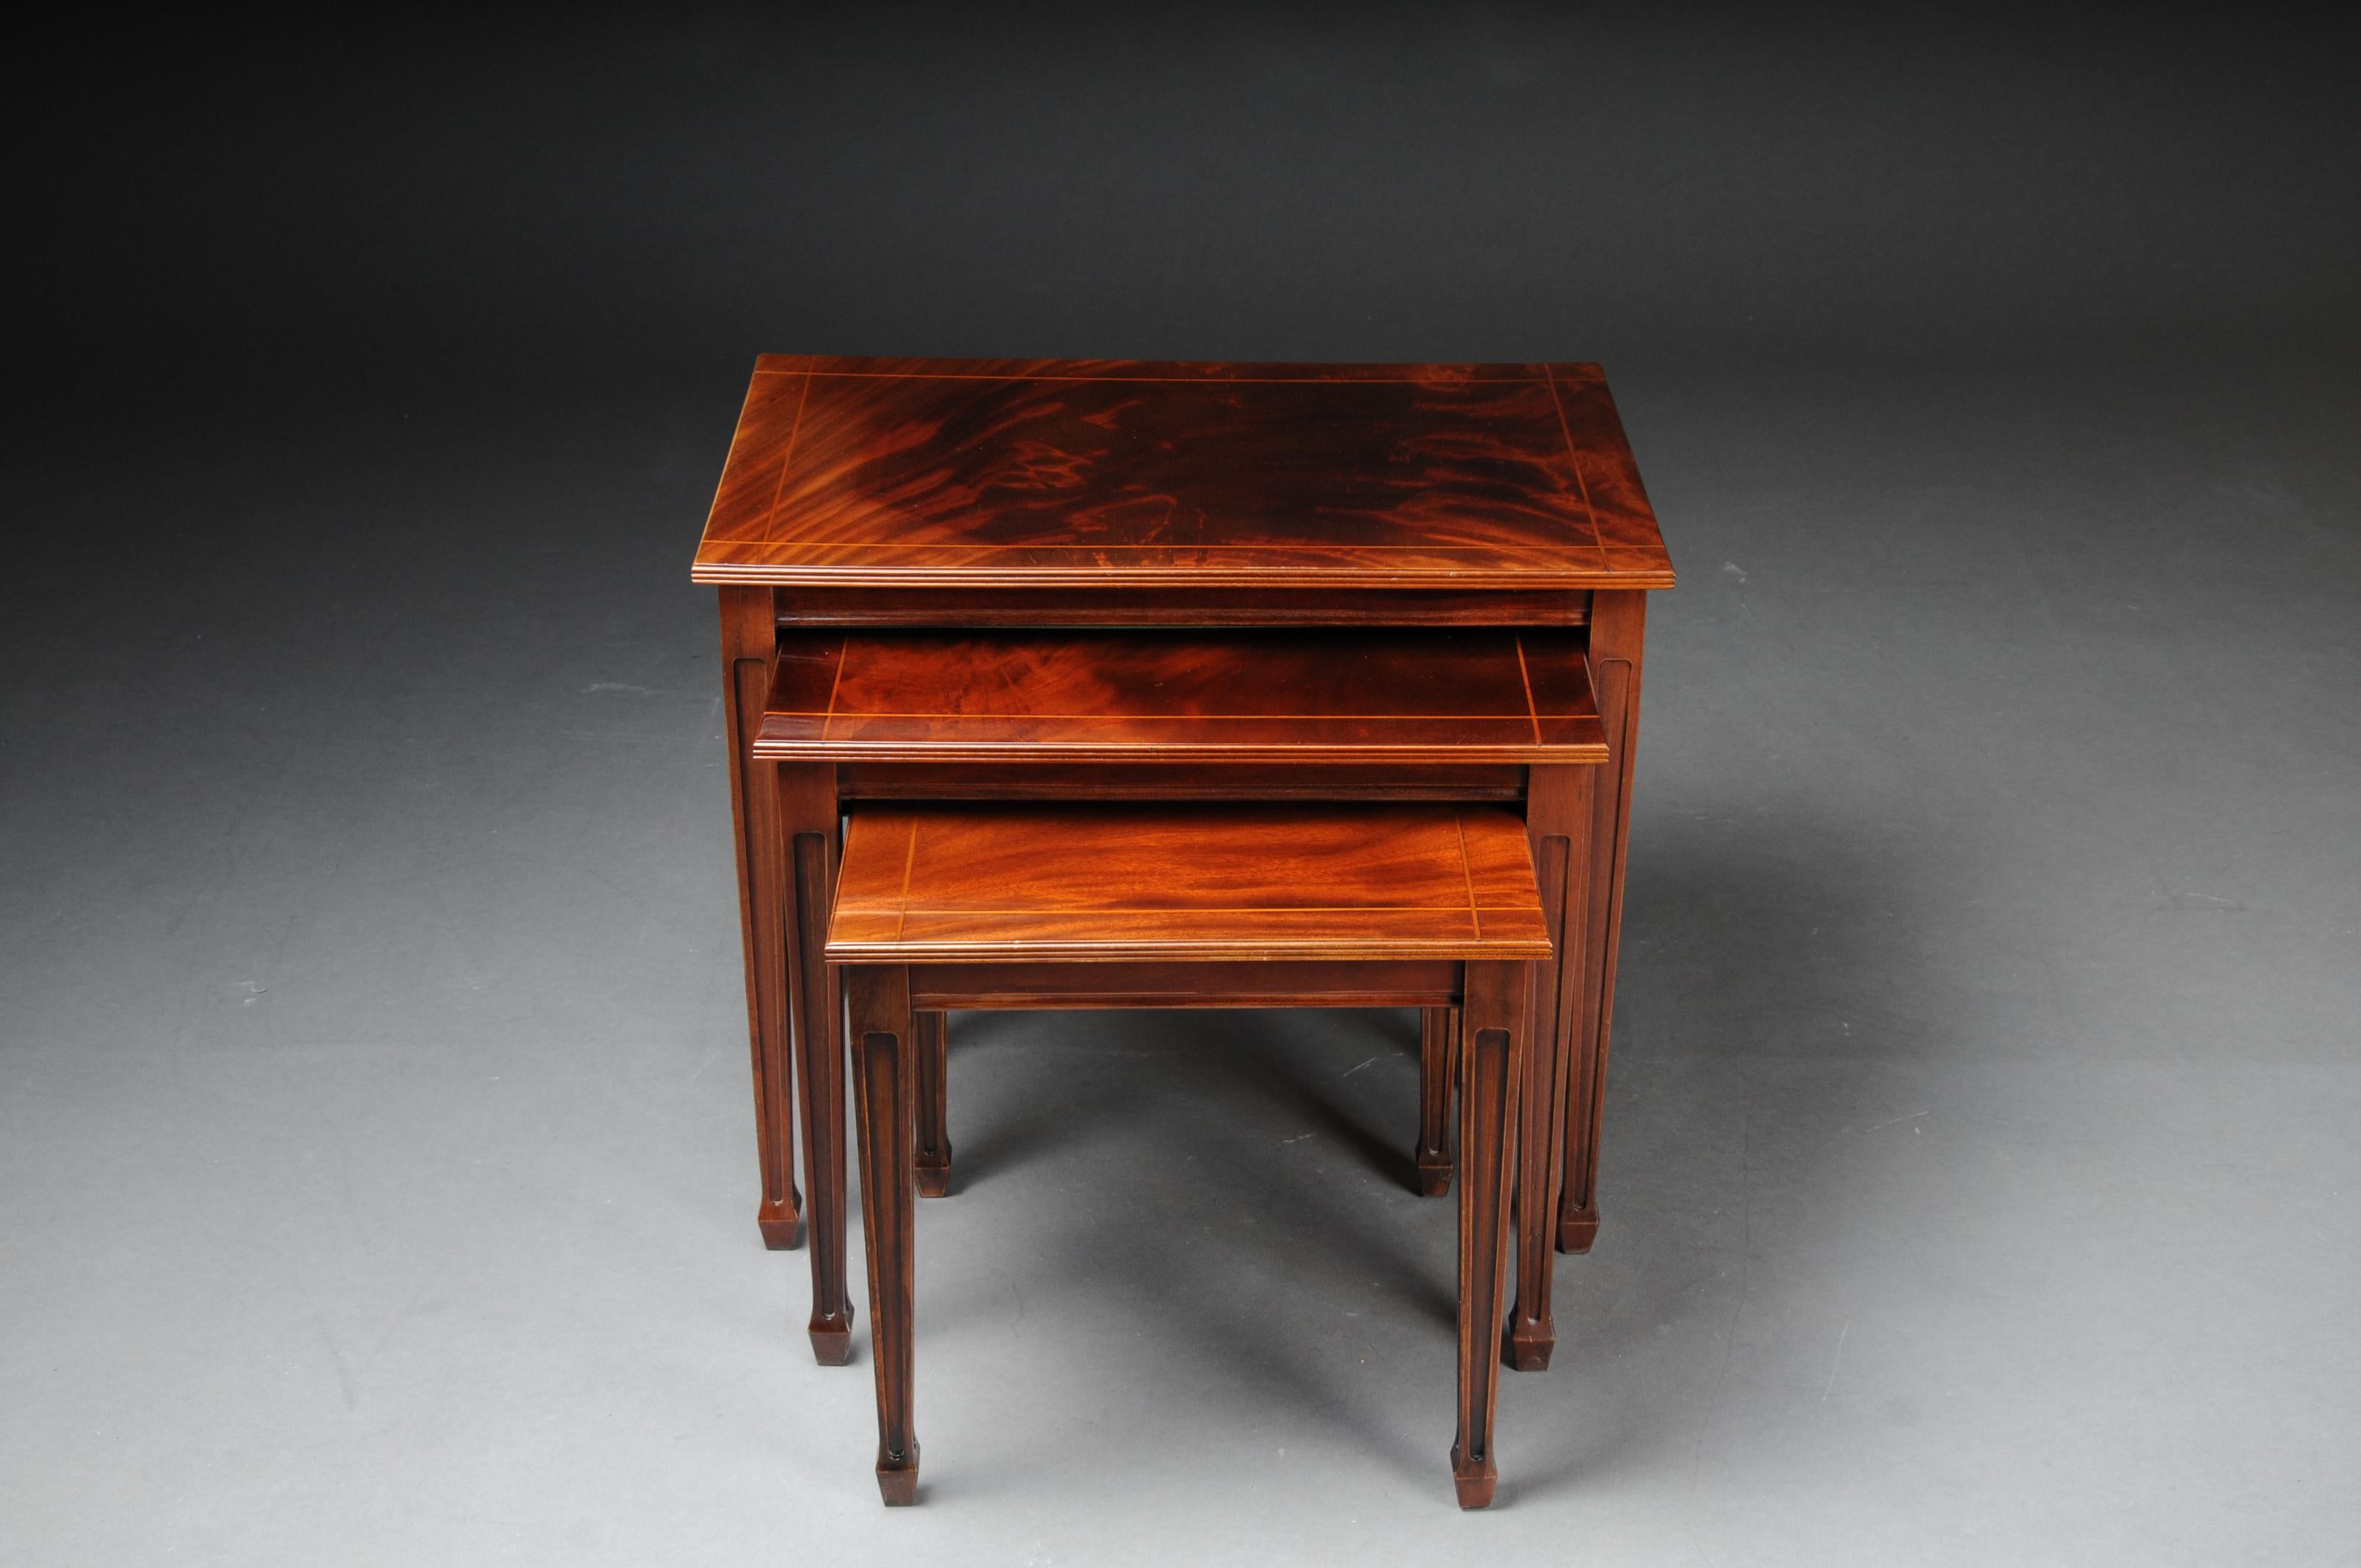 Stained 20th Century English Set of 3 Side Tables, Mahogany